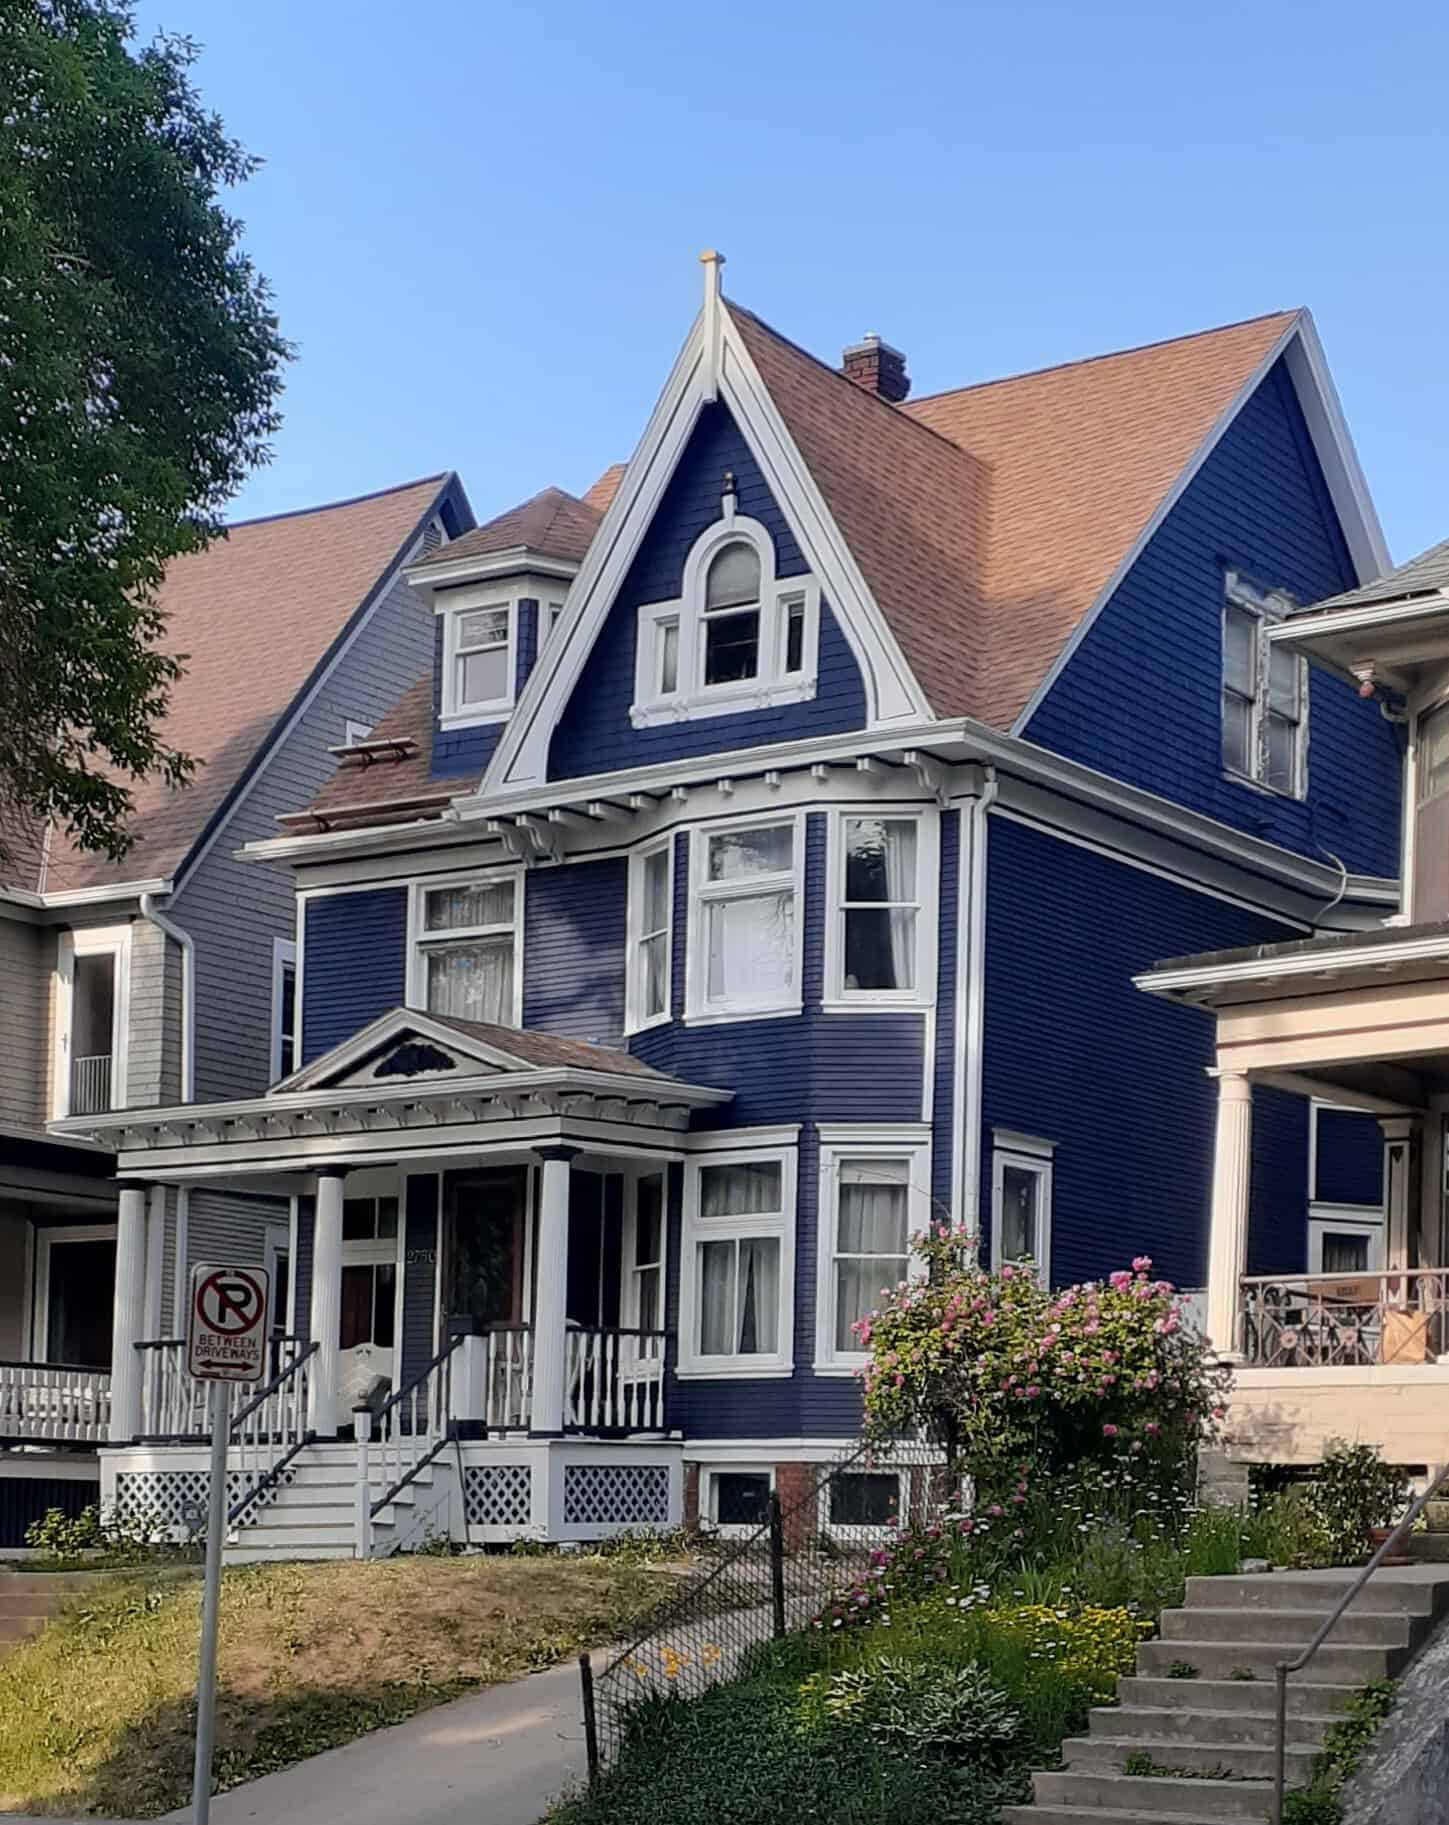 Large blue house with white trim